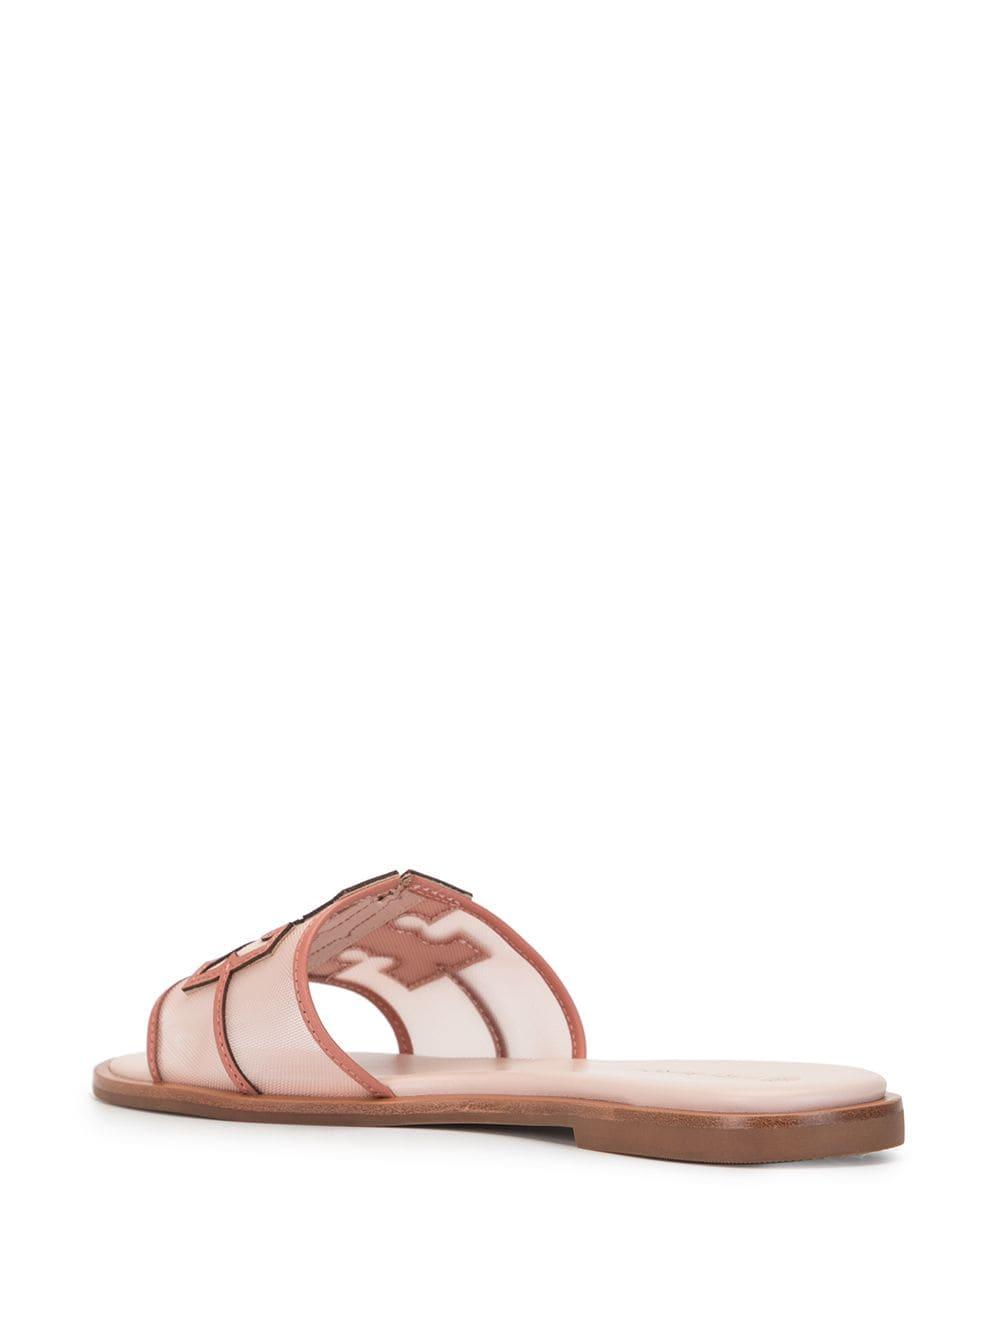 Tory Burch Leather Ines Slides in Pink - Lyst